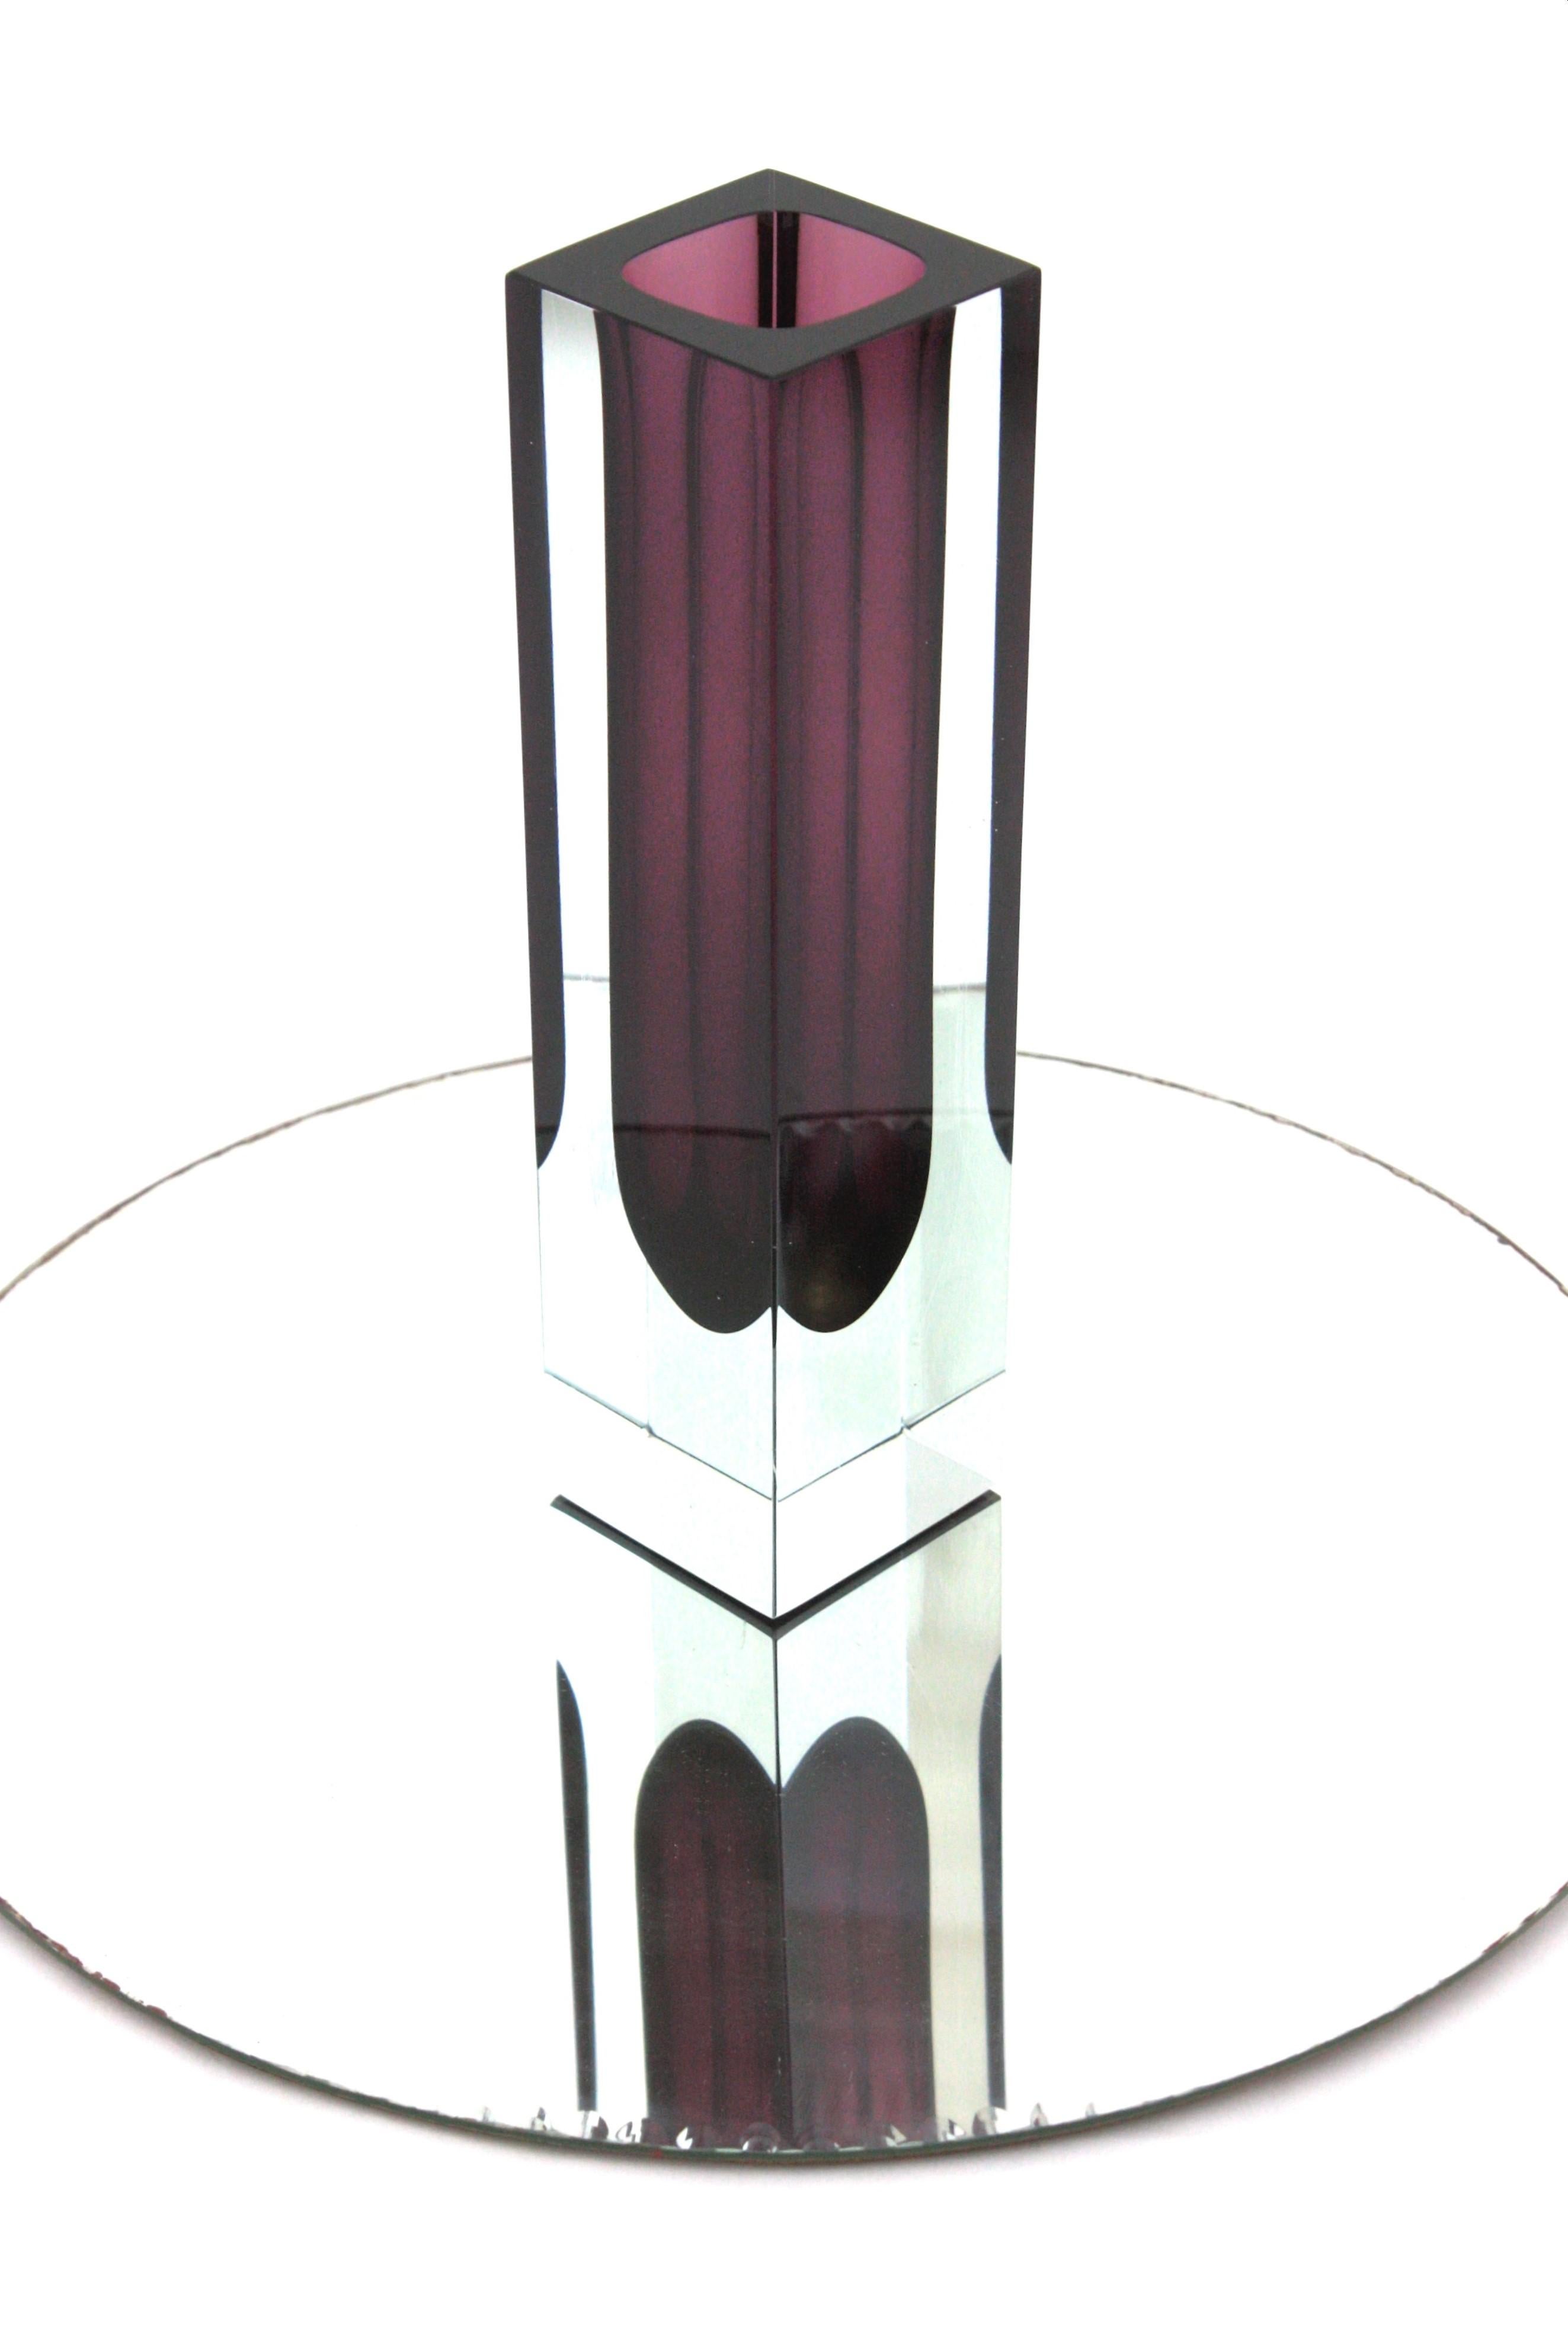 Giant Flavio Poli Murano Sommerso Purple Clear Faceted Art Glass Vase In Good Condition For Sale In Barcelona, ES